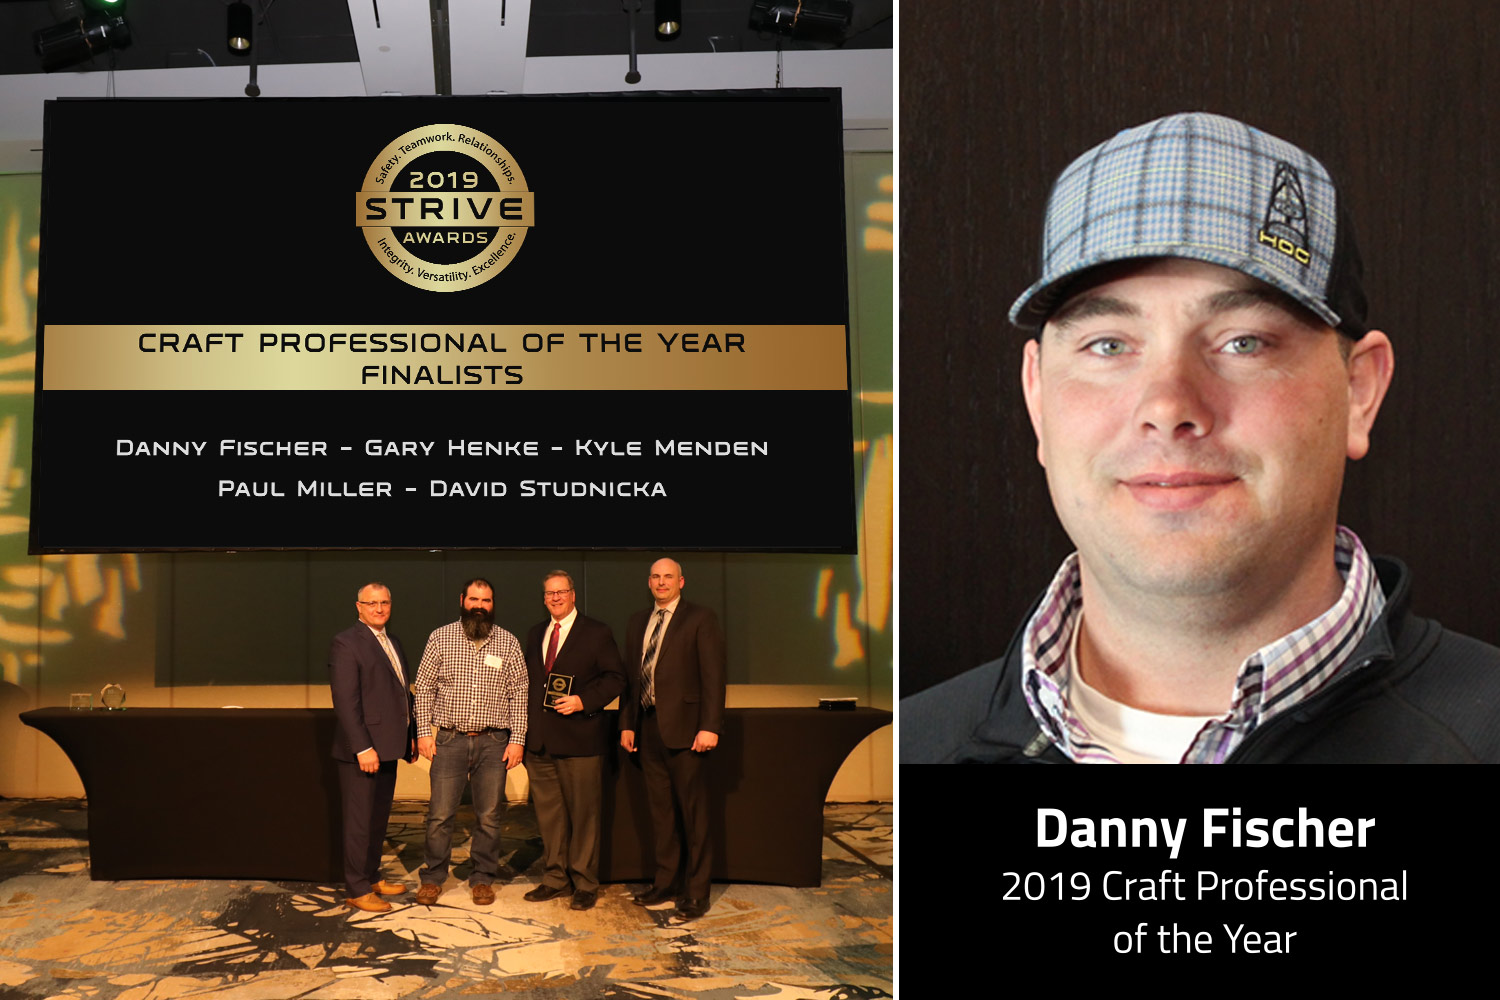 Danny Fischer, 2019 Craft Professional of the Year